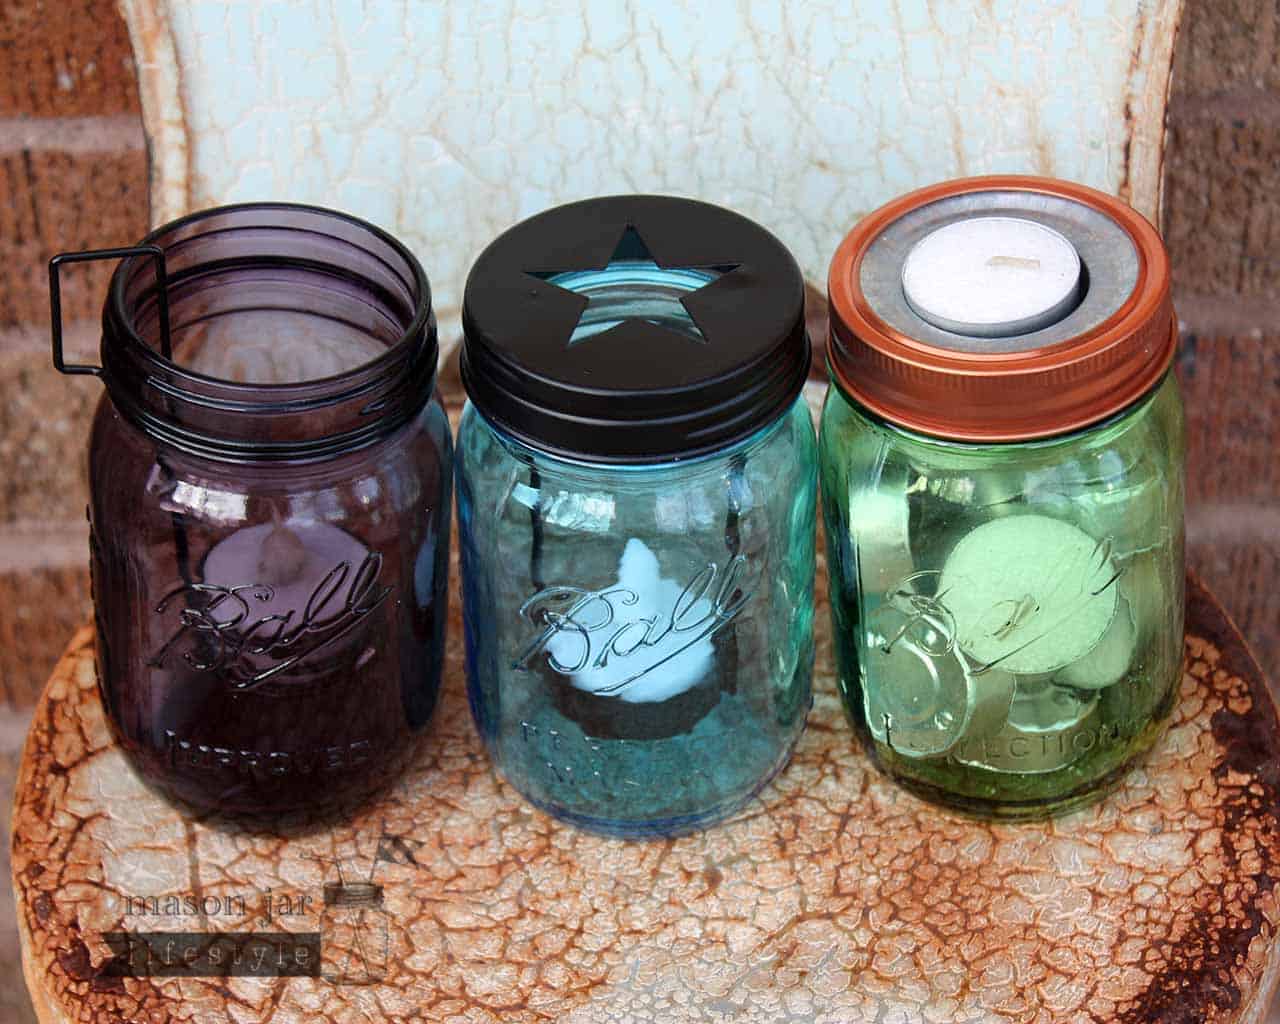 Three types of tea light candle holders on green, blue, and purple Ball Mason jars on rusty chair